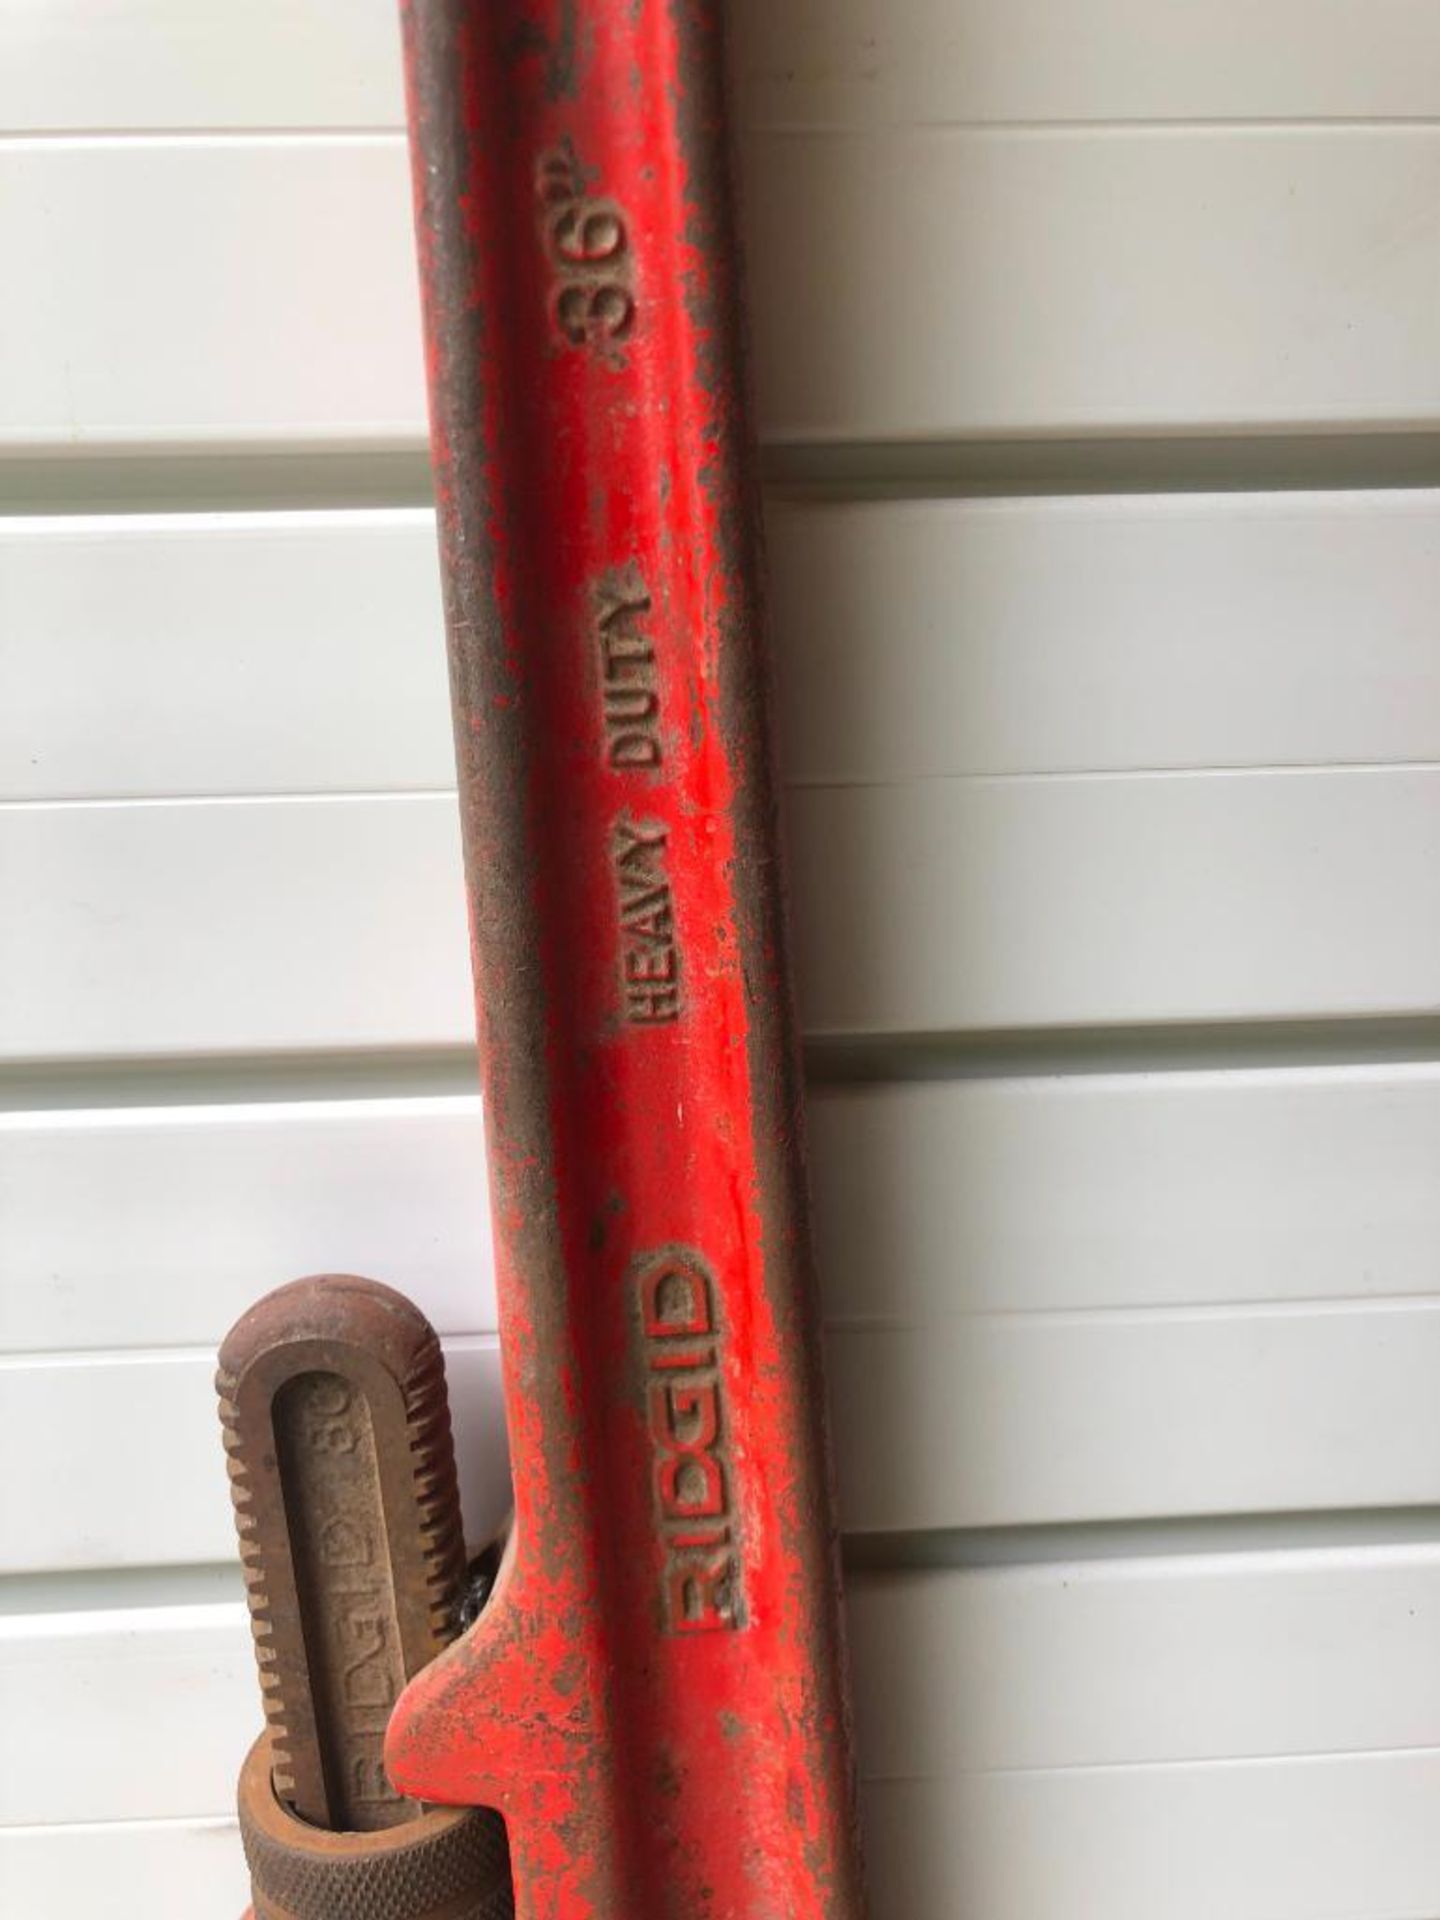 Ridgid Heavy Duty 36" Pipe Wrench - Image 2 of 2